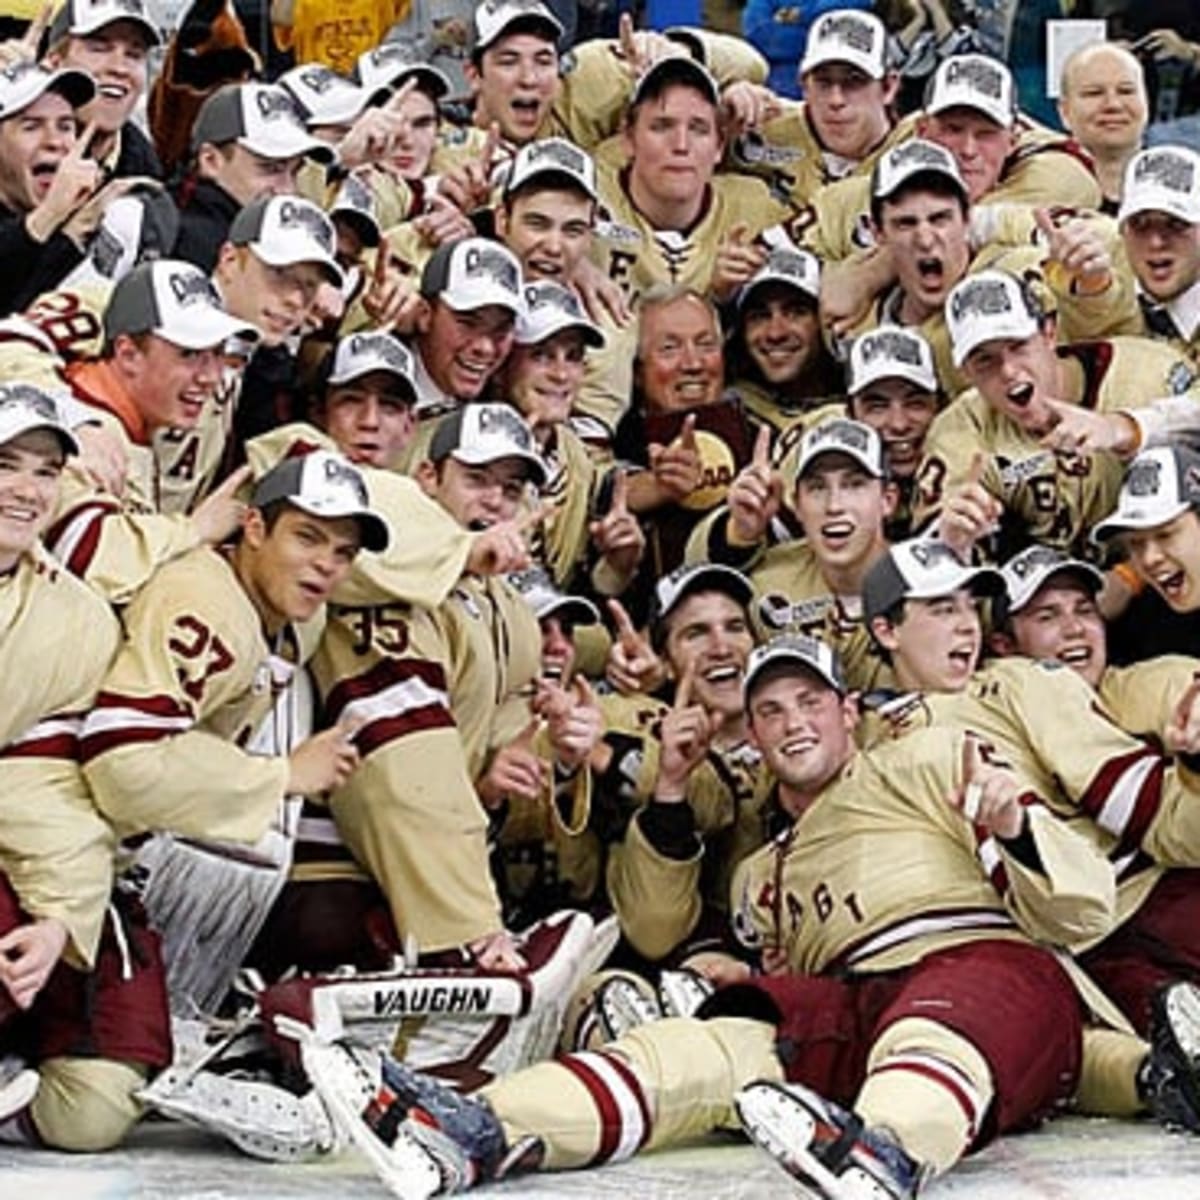 NCAA Frozen Four: Boston College takes down title for coach Jerry York -  The Hockey News